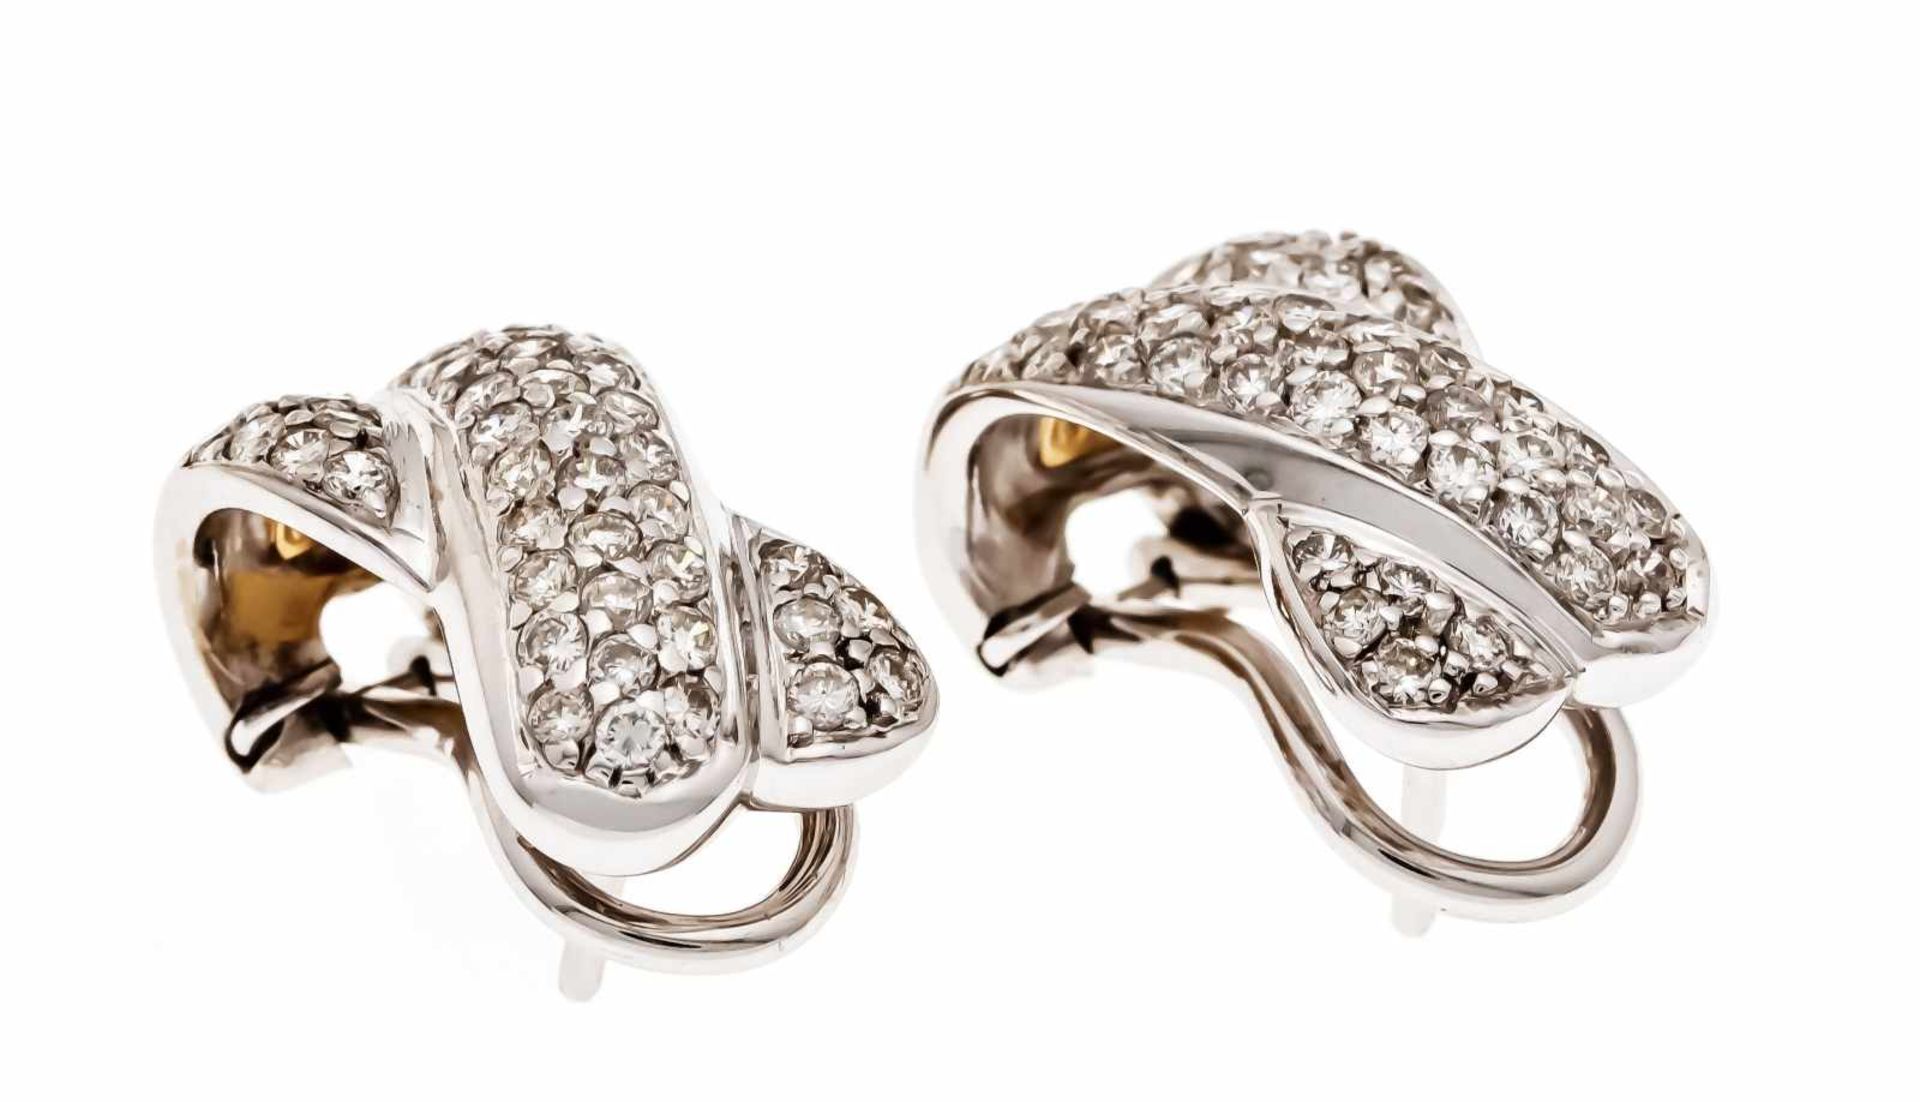 Christ Brillant clip earrings WG 750/000 with diamonds, total 1.0 ct W / VS-SI, L. 16.4mm, 8.3